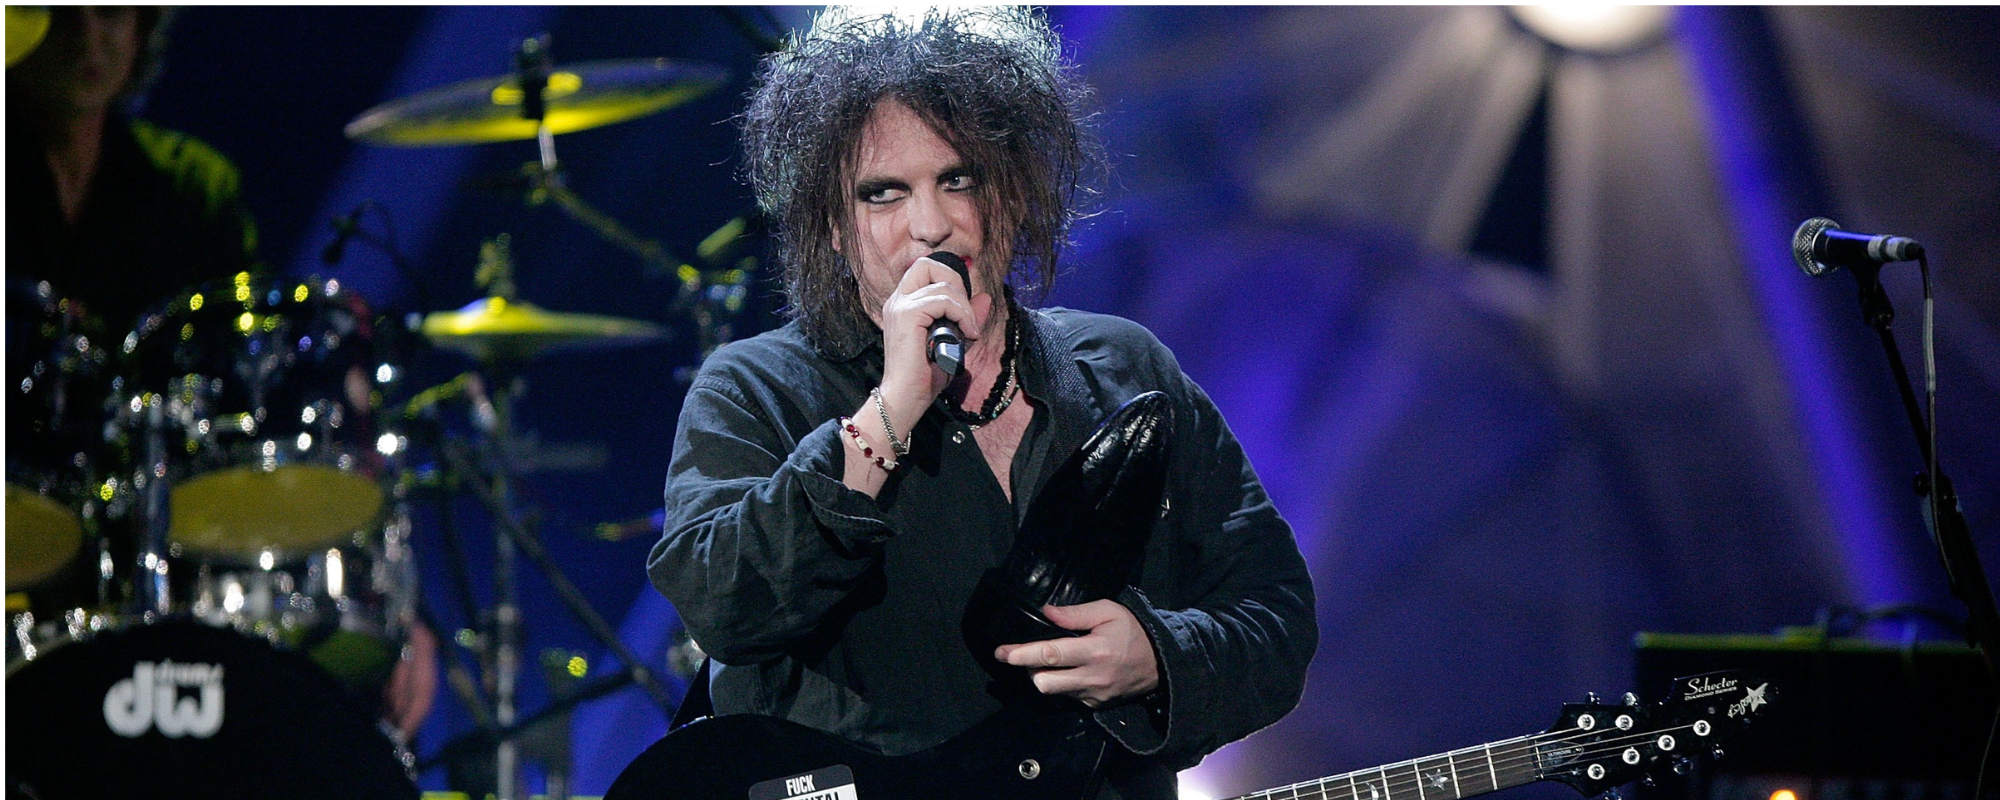 The 20 Best Quotes from The Cure’s Robert Smith